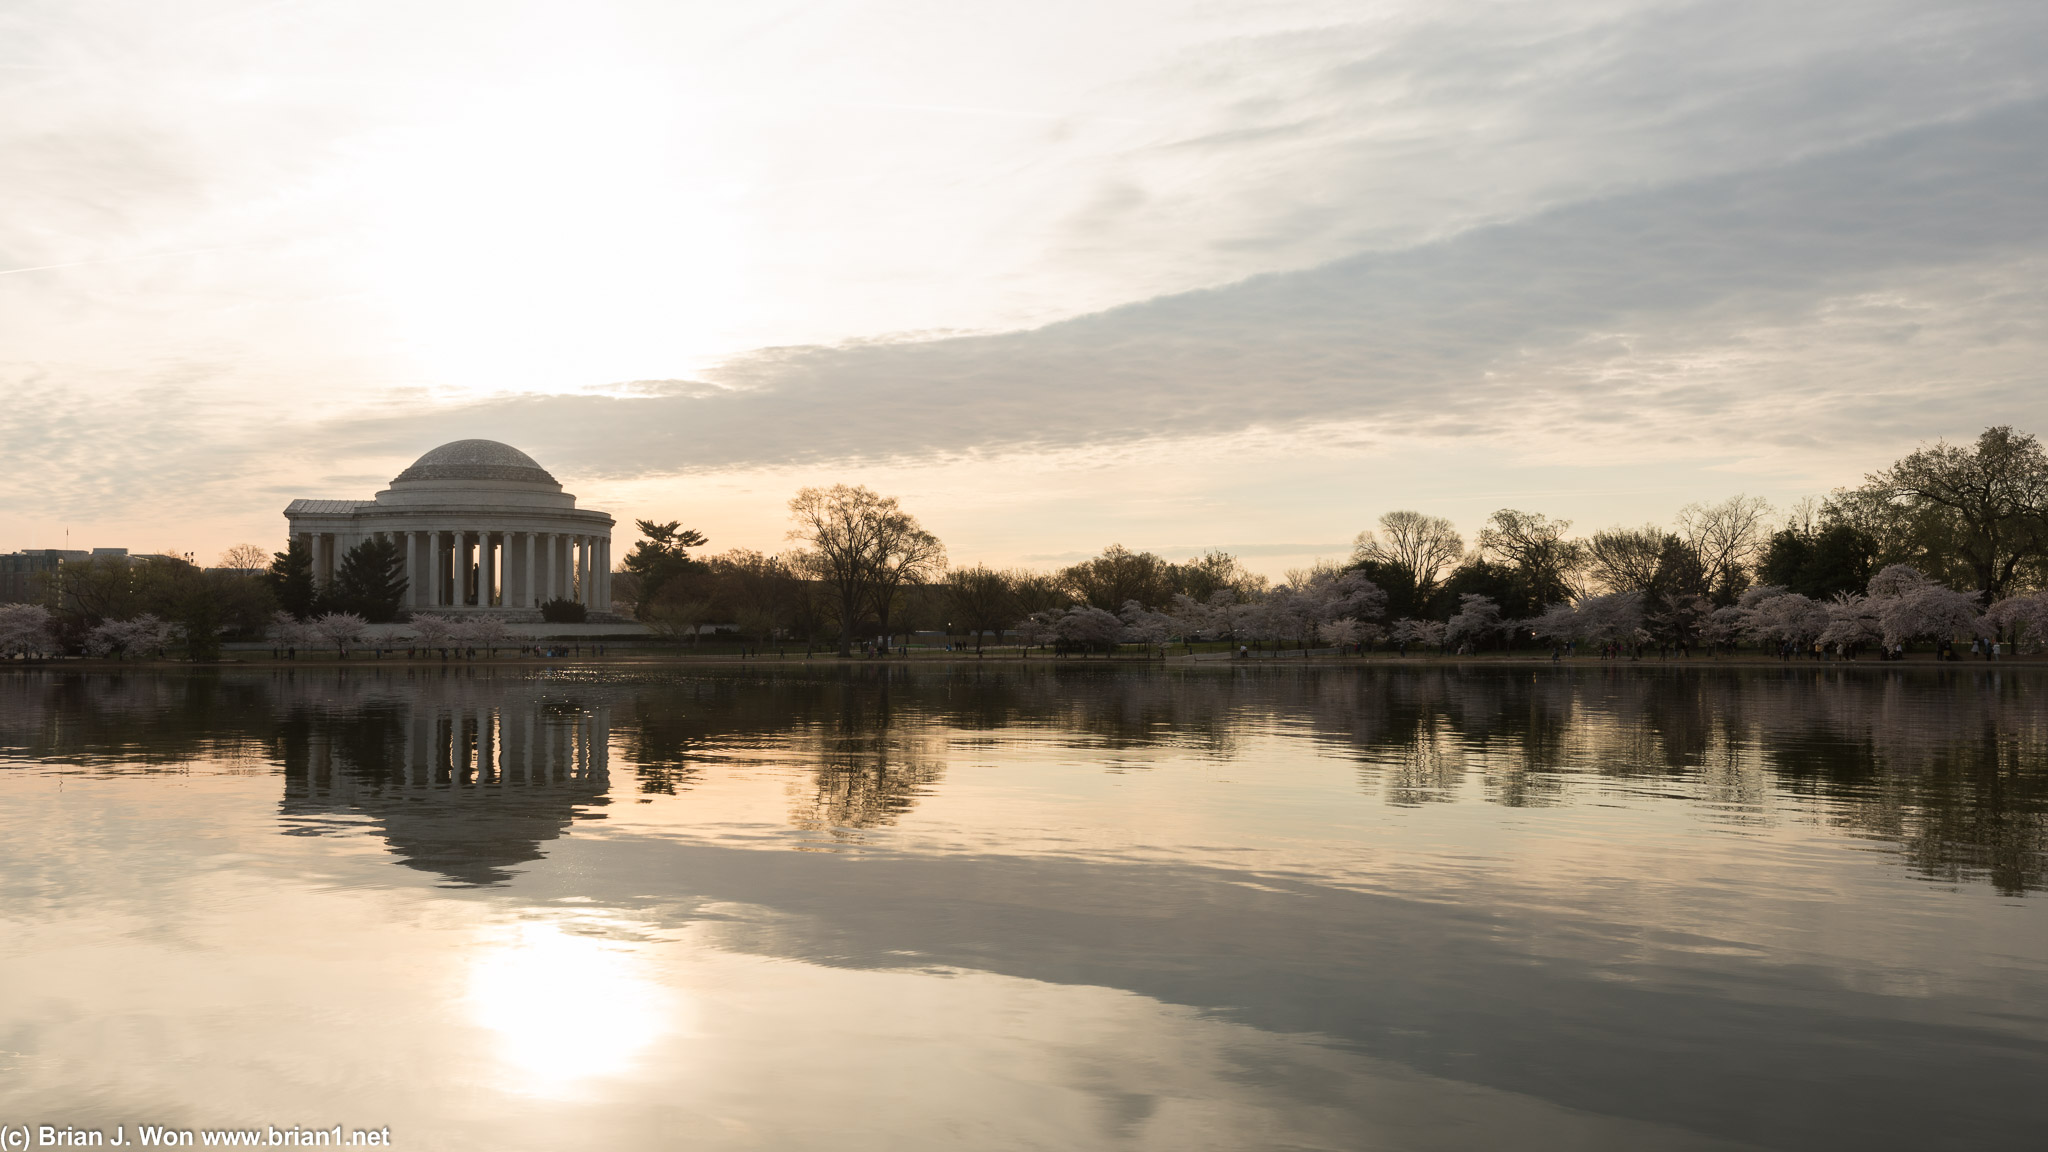 The Tidal Basin is like a mirror.